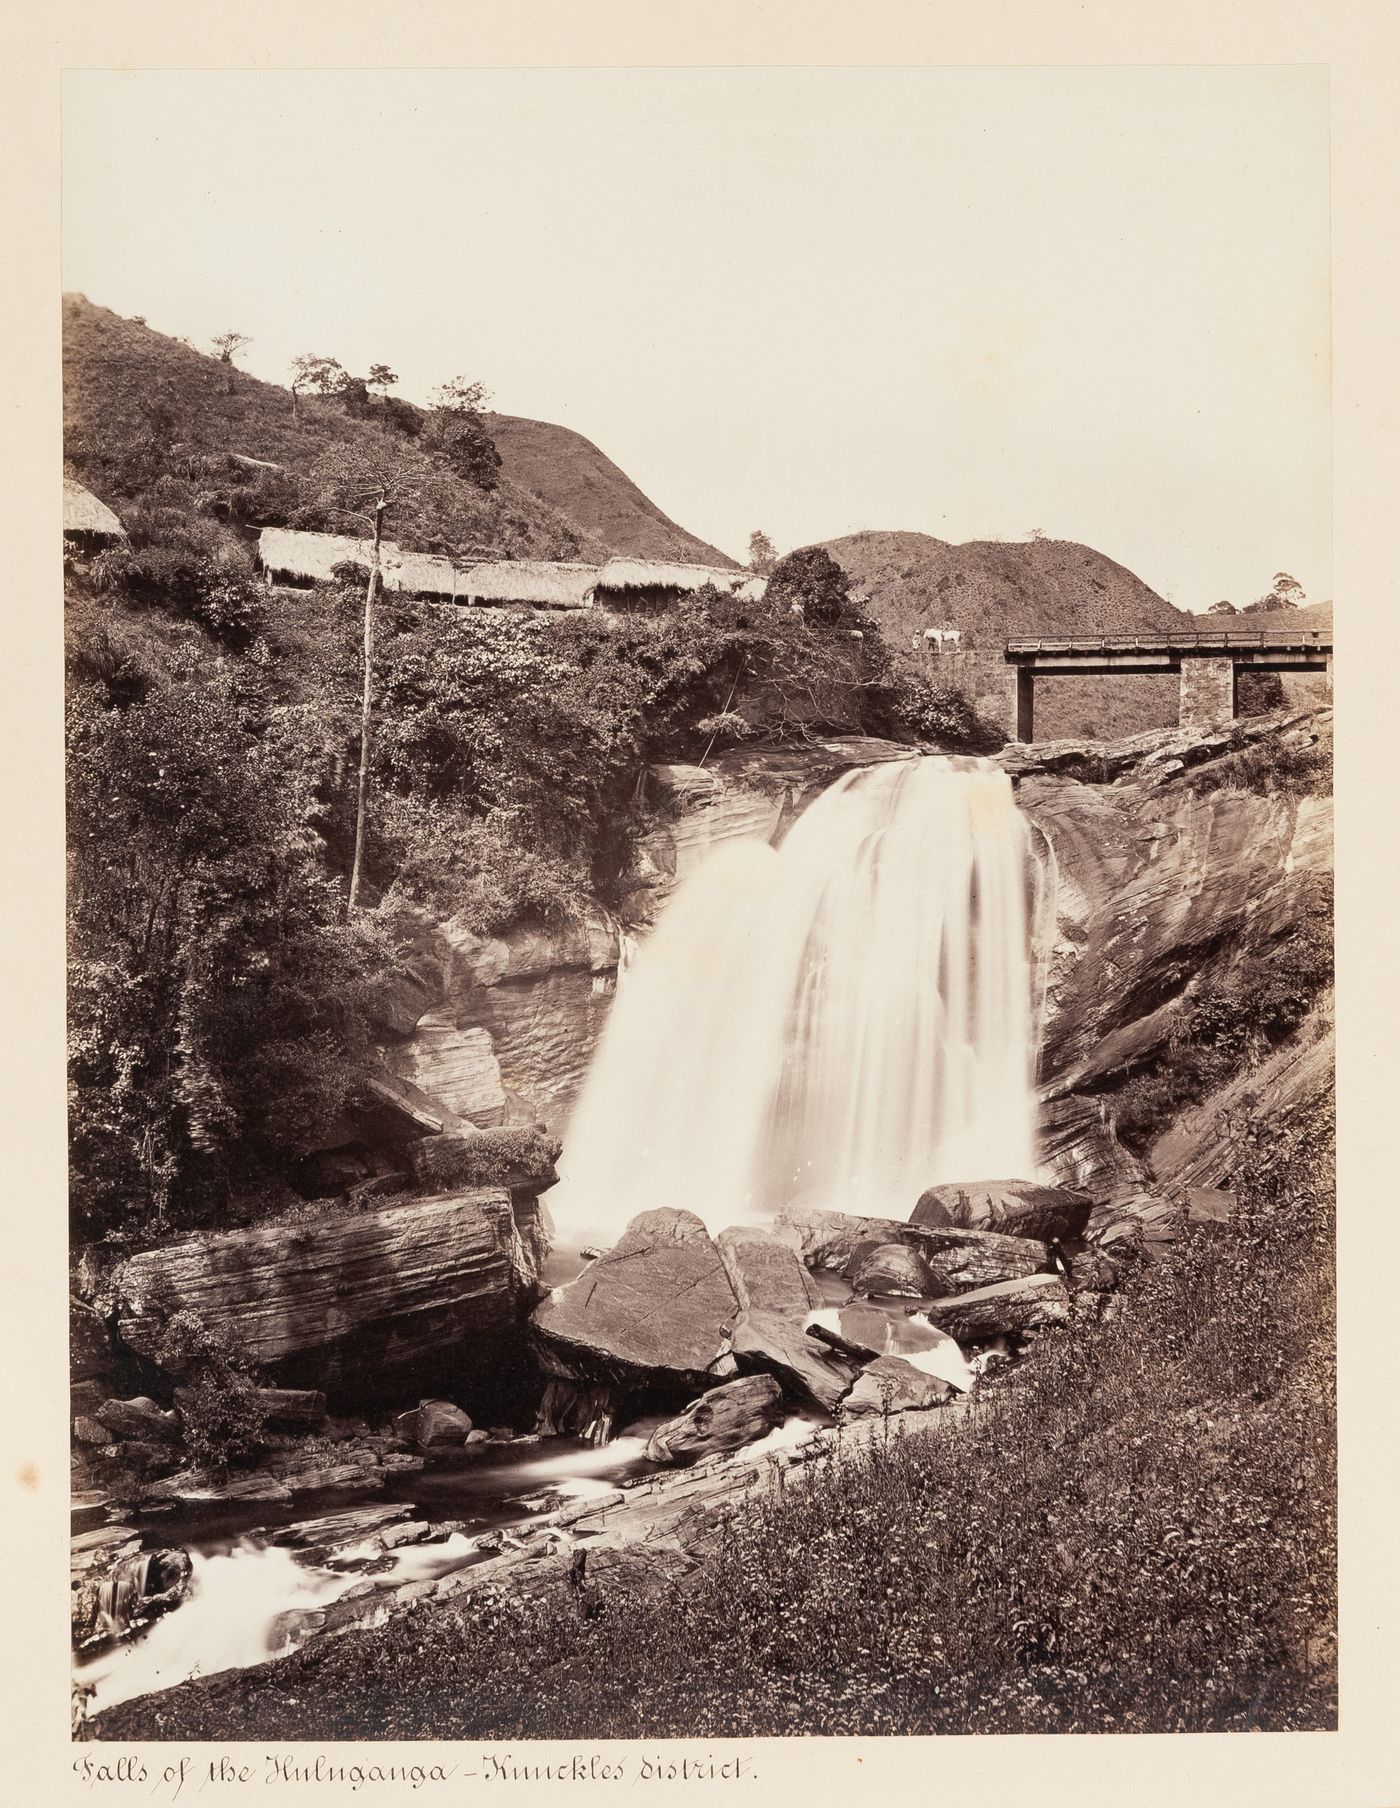 View of the Falls of the Hulu Ganga showing buildings and a bridge, Knuckles District [?], Ceylon (now Sri Lanka)